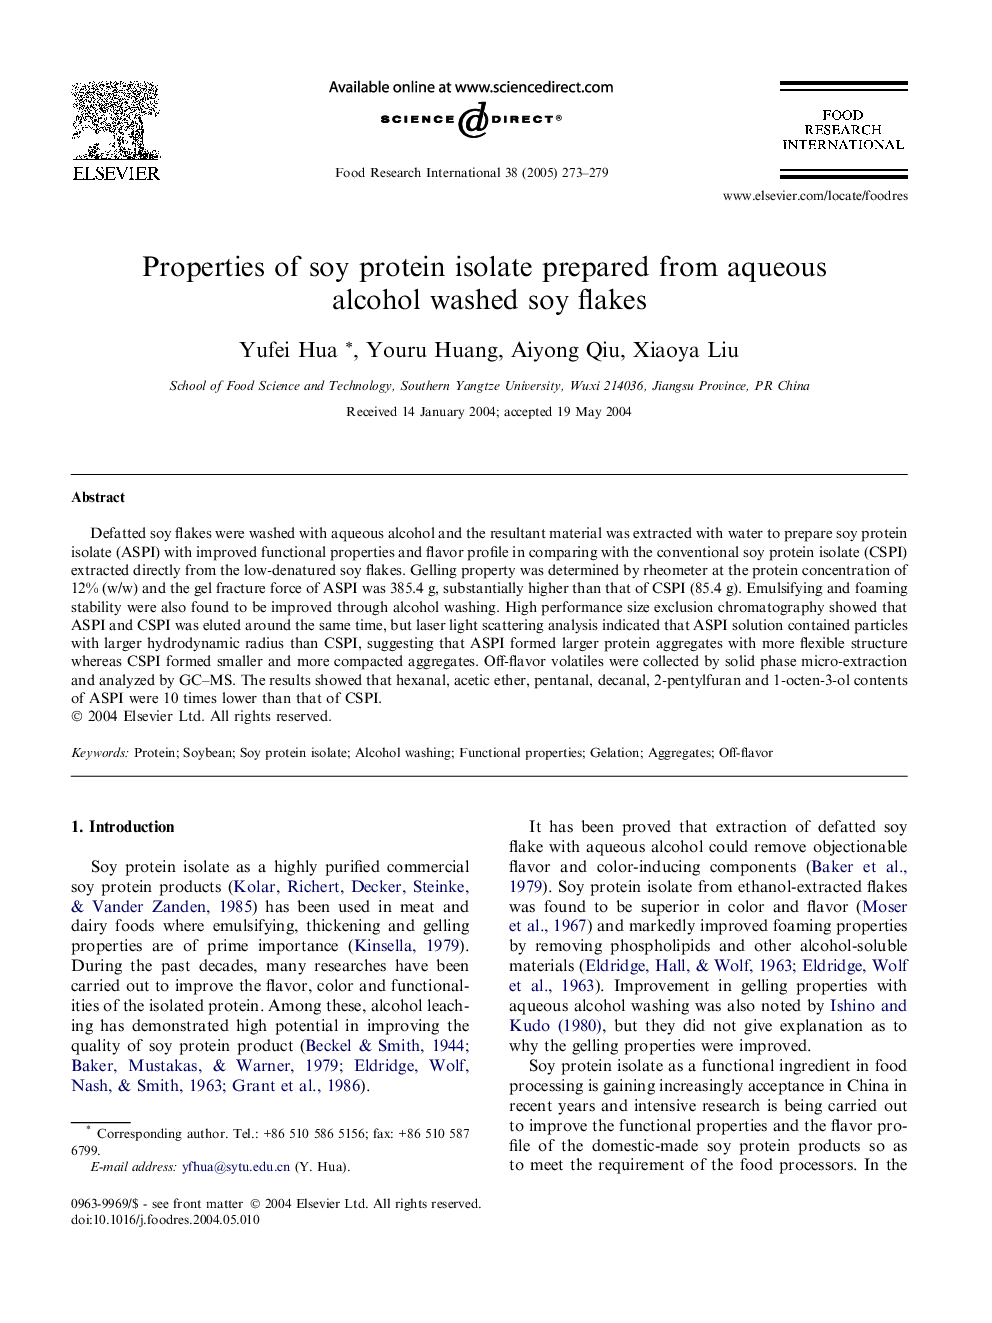 Properties of soy protein isolate prepared from aqueous alcohol washed soy flakes